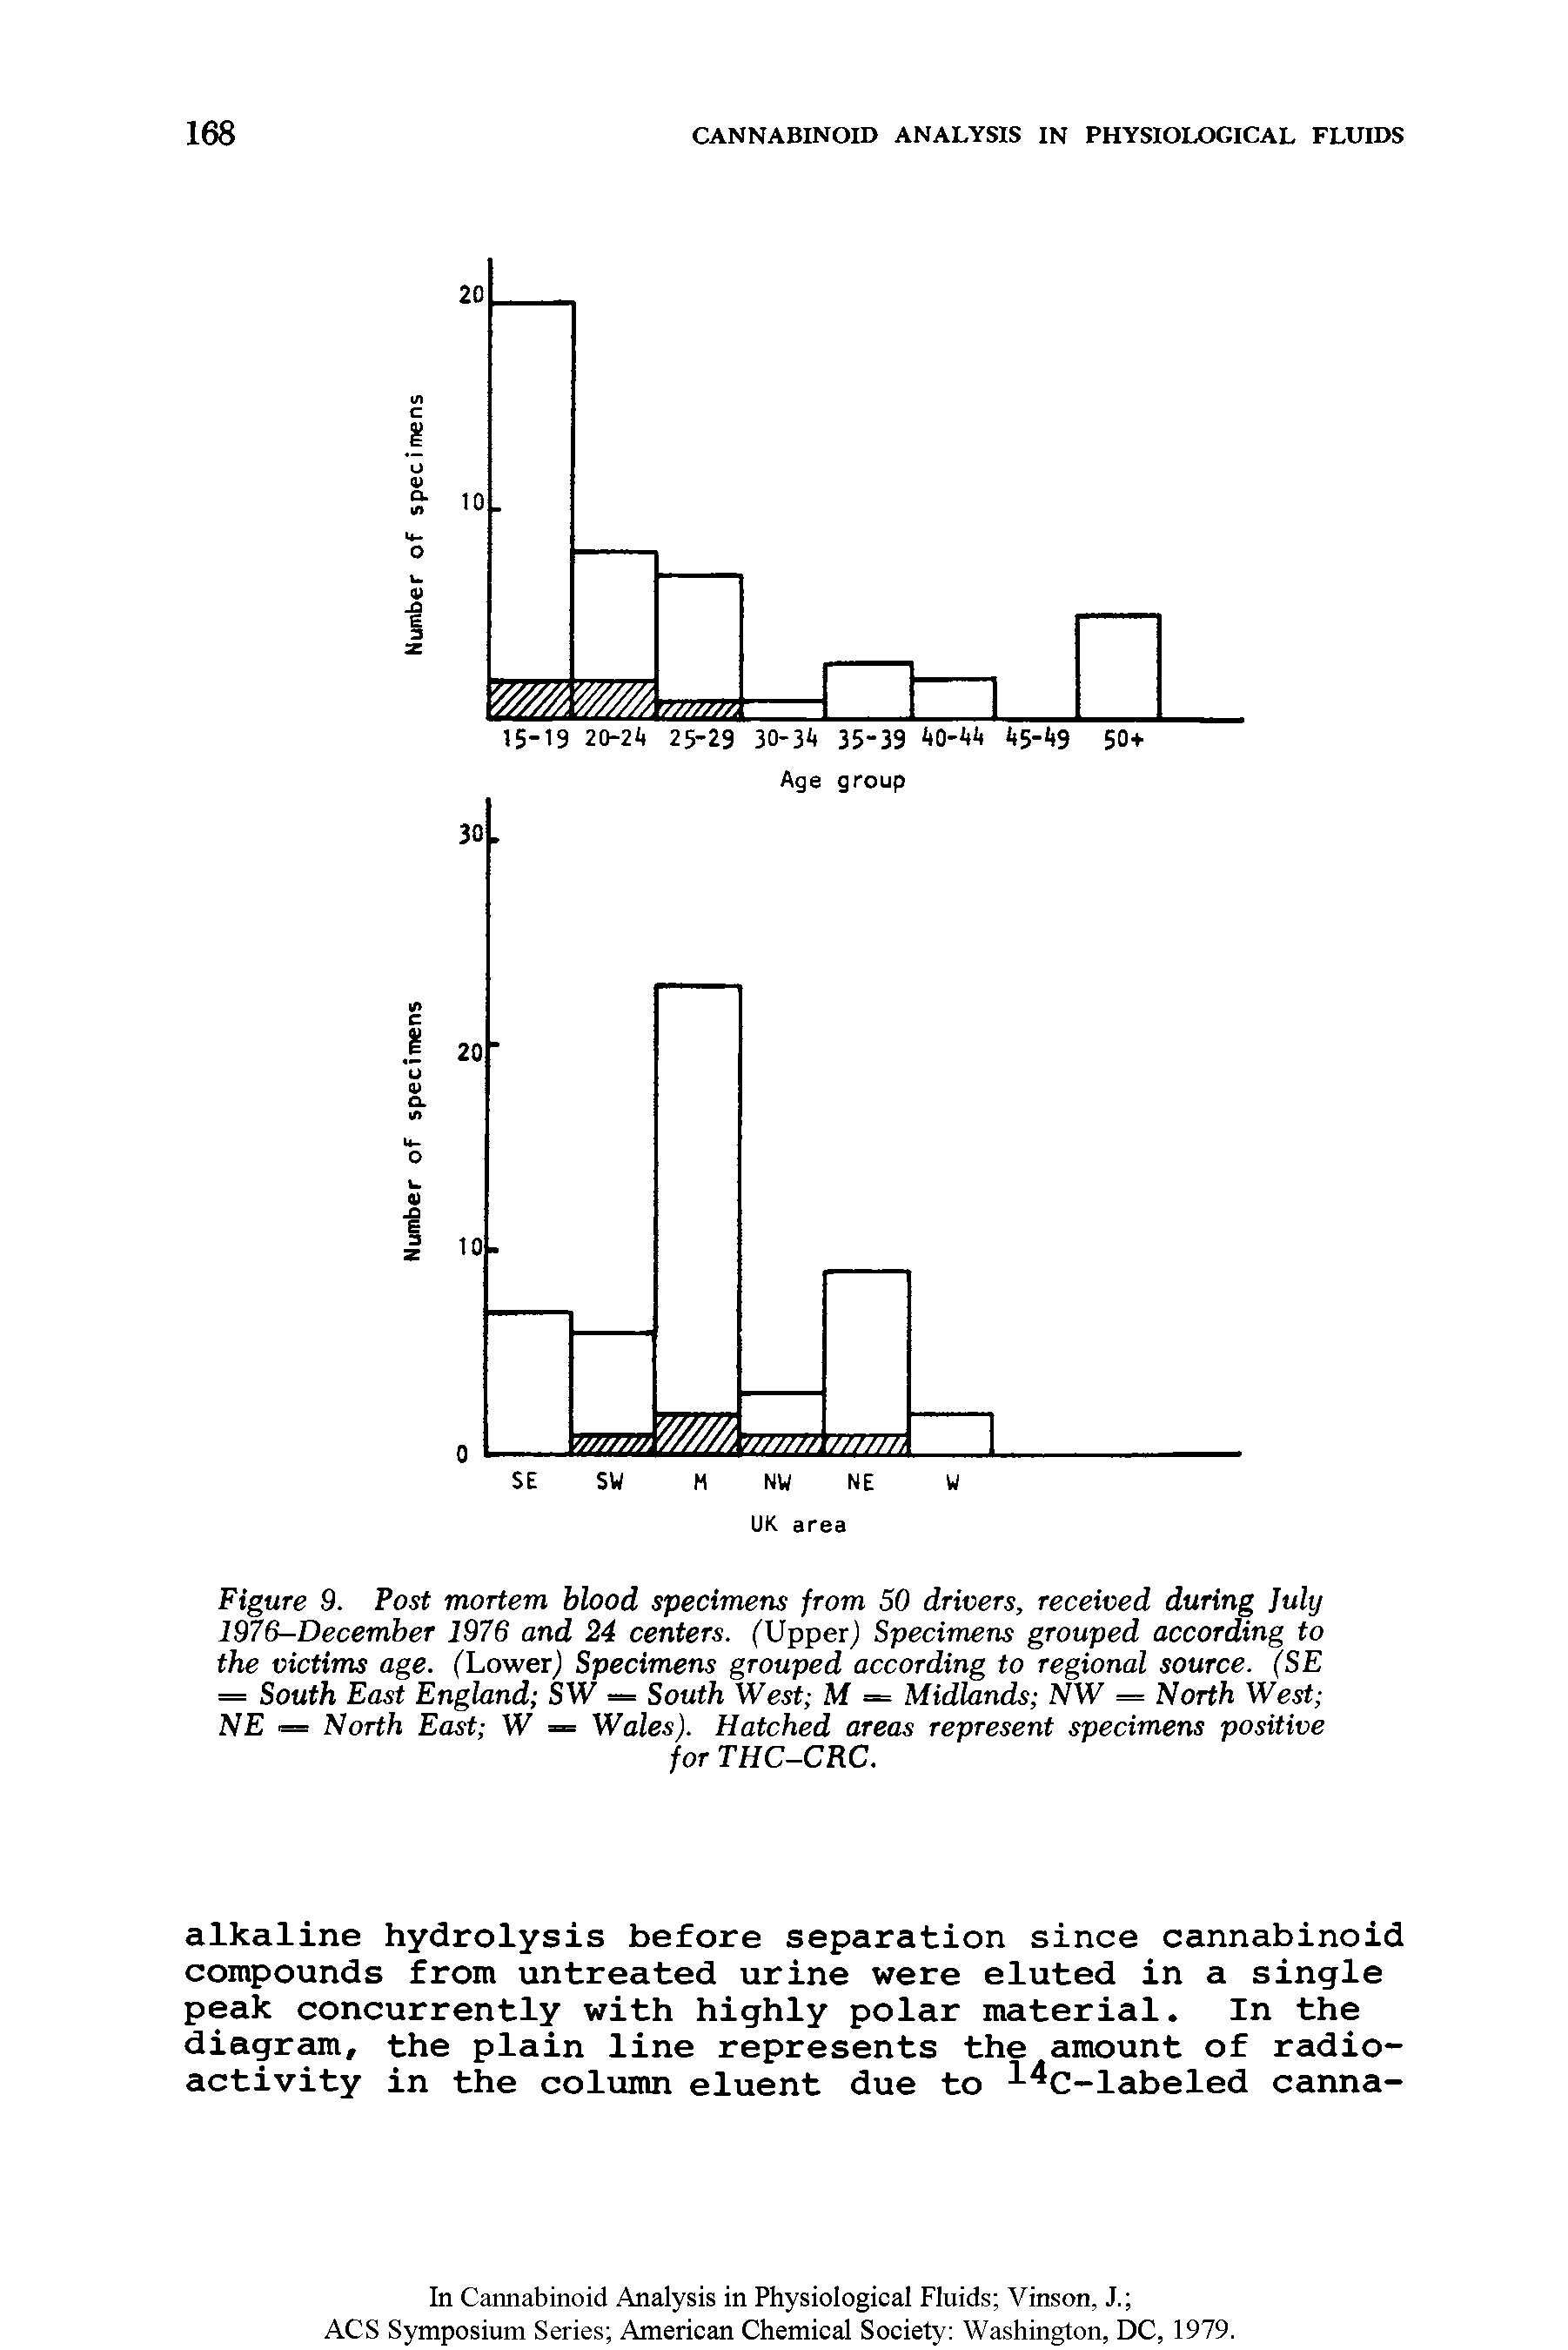 Figure 9. Post mortem blood specimens from 50 drivers, received during July 1976-December 1976 and 24 centers. (Upper) Specimens grouped according to the victims age. (Lower) Specimens grouped according to regional source. (SE = South East England SW - South West M -- Midlands NW = North West NE — North East W — Wales). Hatched areas represent specimens positive...